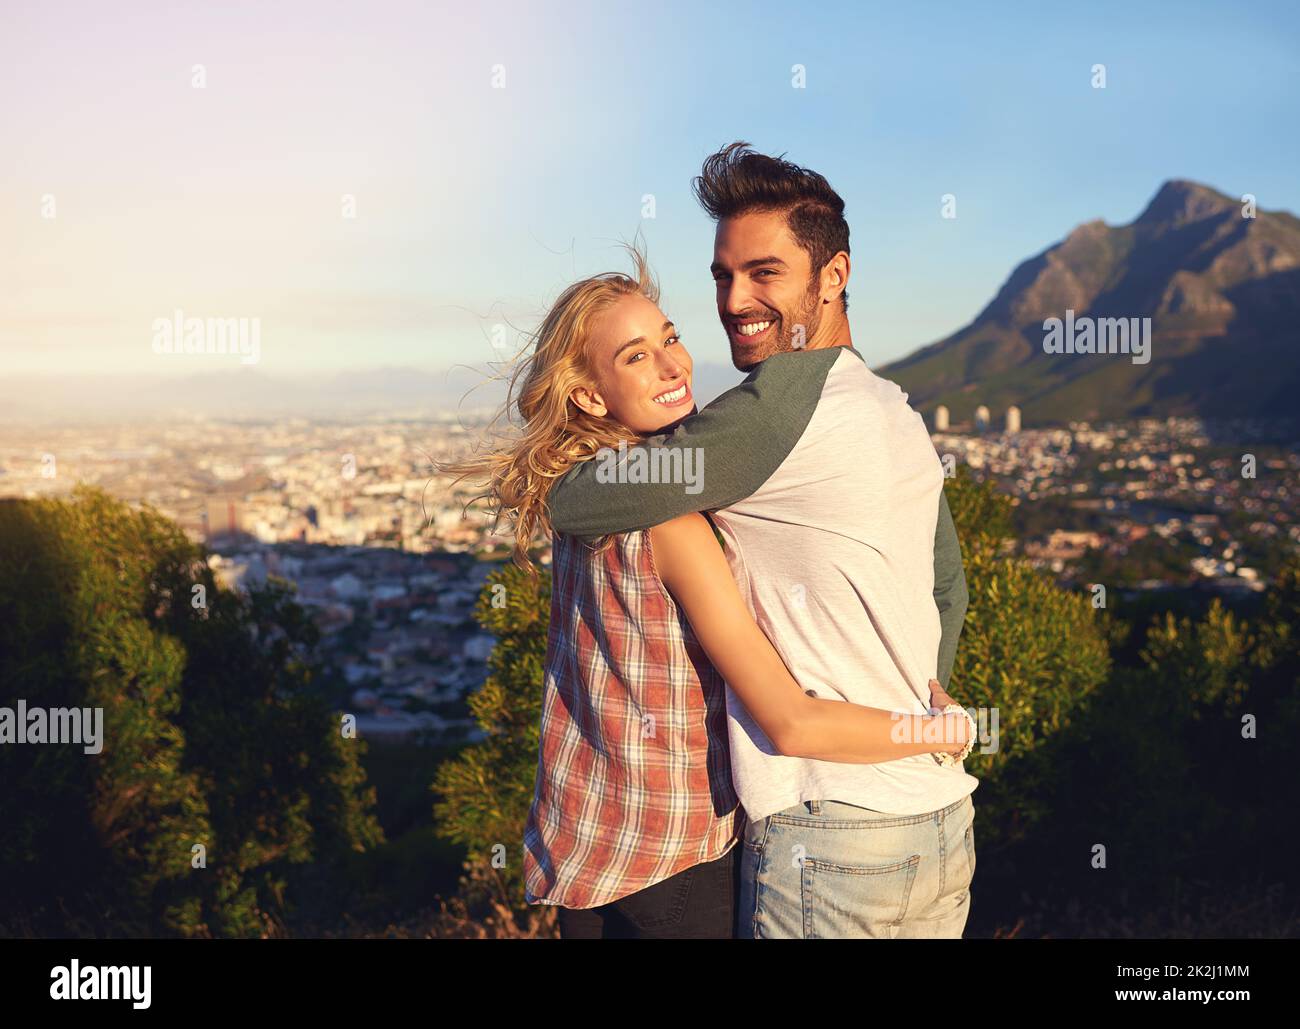 It's so beautiful out here. Portrait of an affectionate young couple admiring the view outdoors. Stock Photo